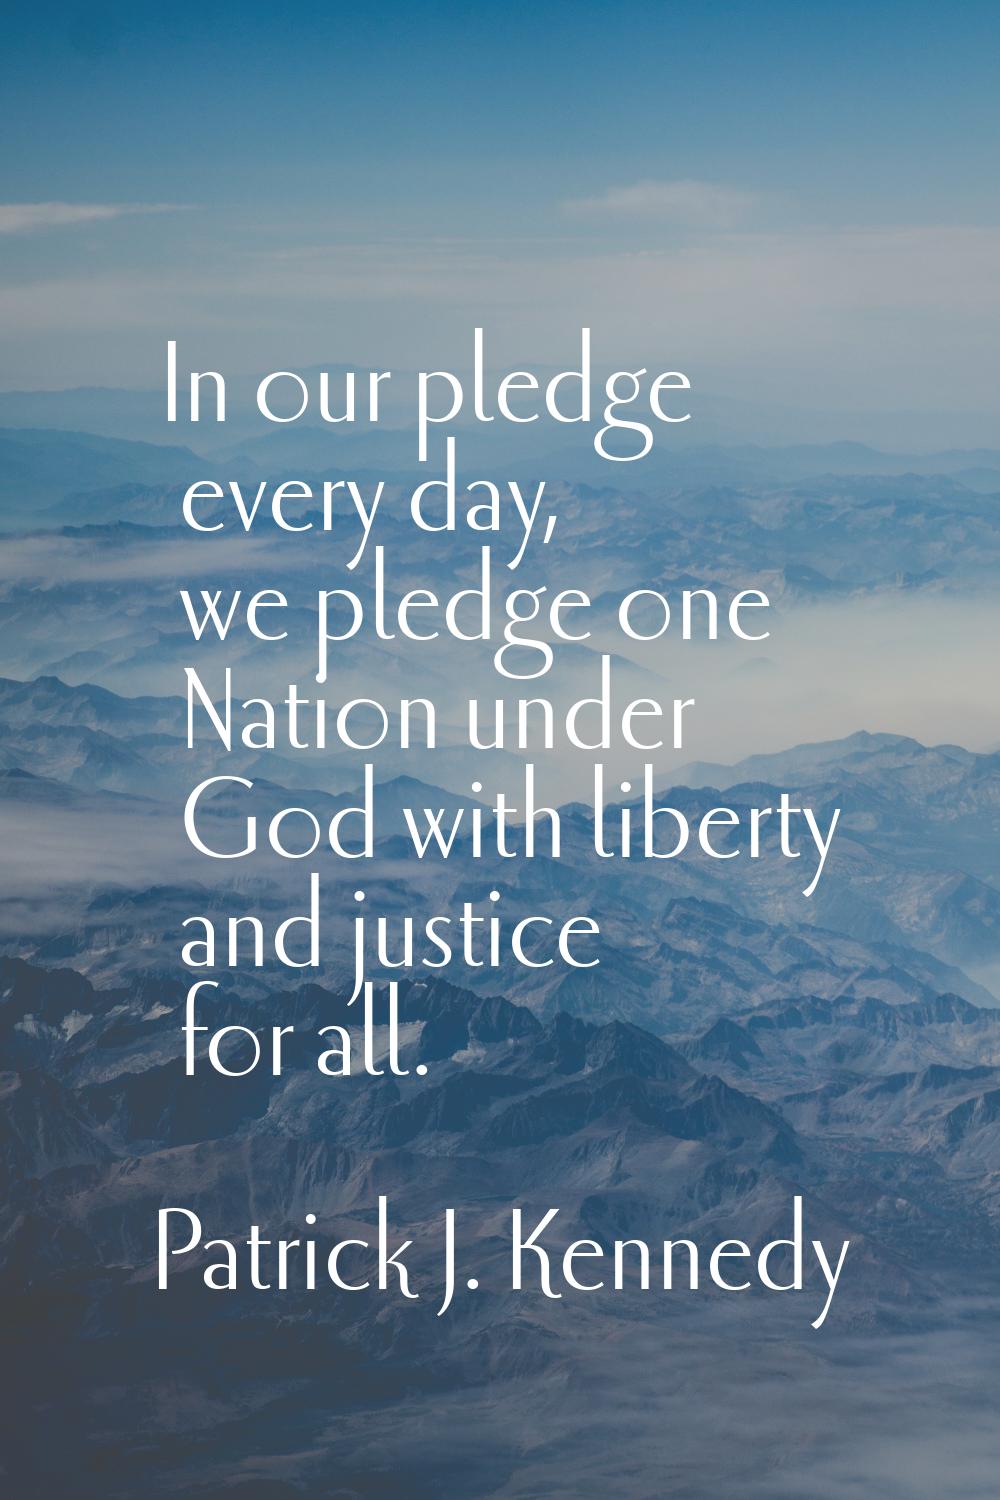 In our pledge every day, we pledge one Nation under God with liberty and justice for all.